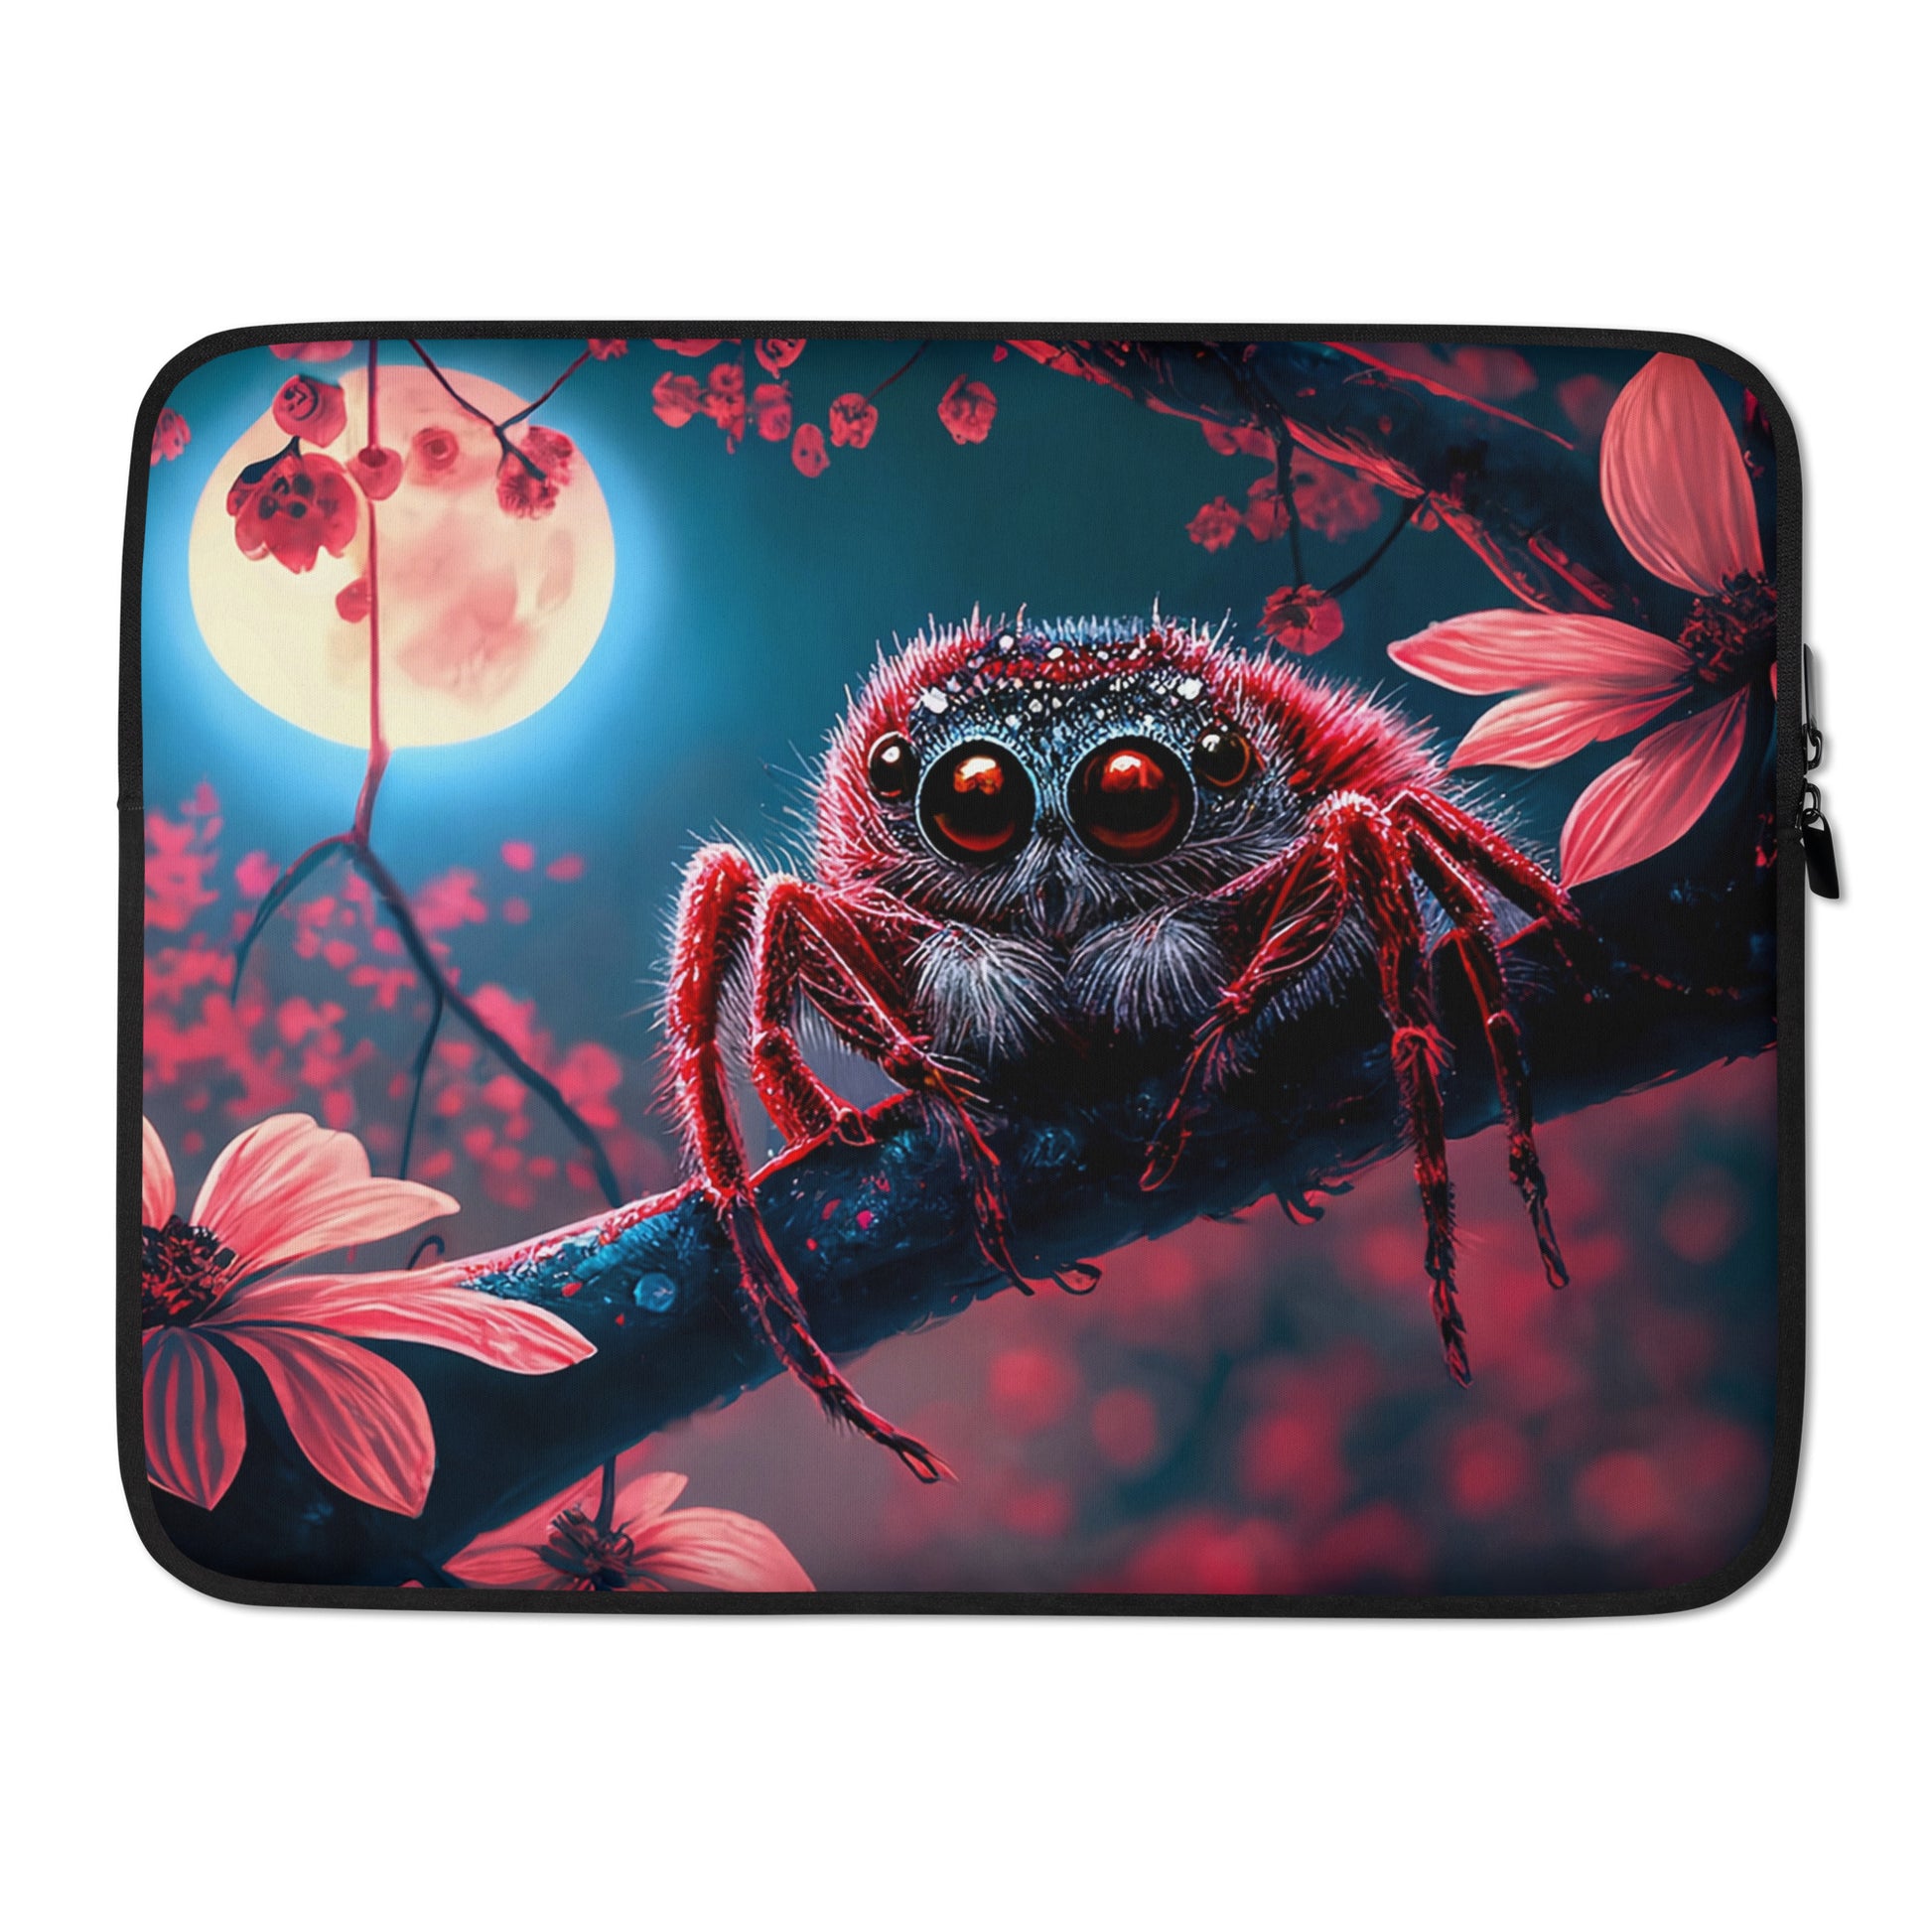 Cherry Blossom Jumping Spider Laptop Sleeve - Jumping Spiders For Sale - Spiders Source - #1 Regal Jumping Spider Store